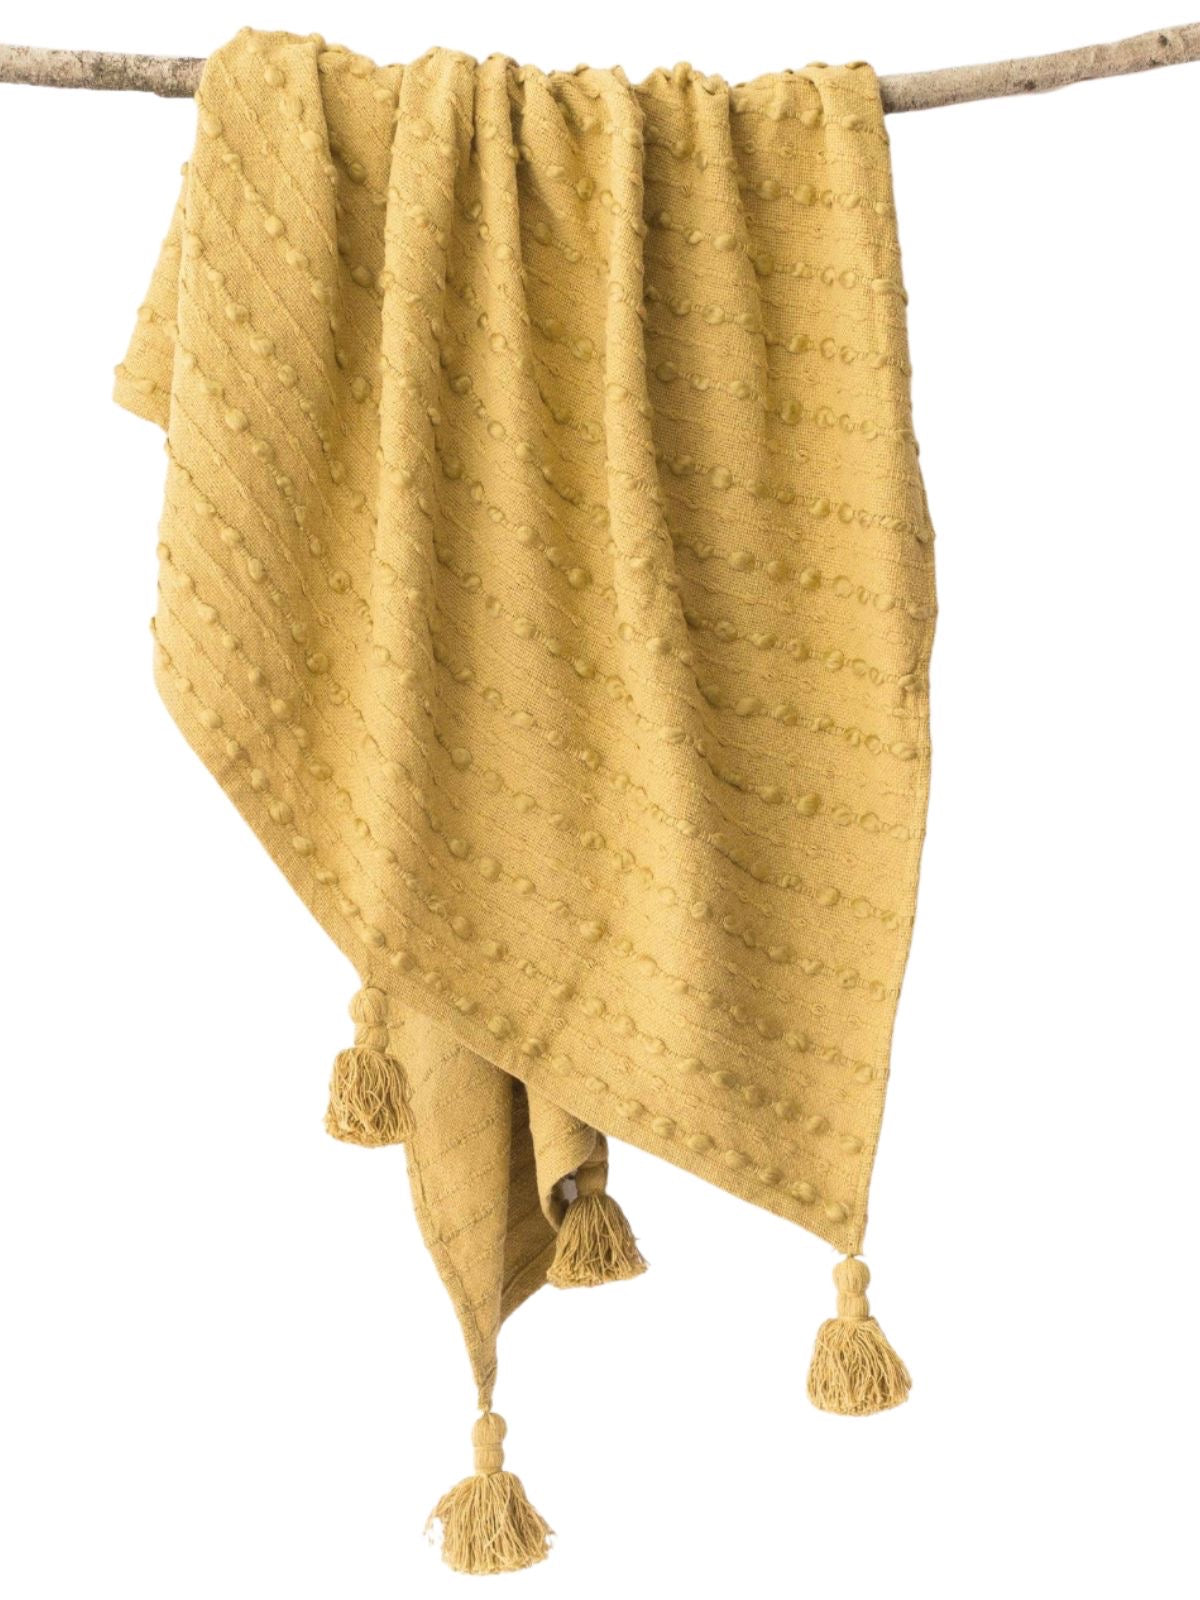 Decorative Throw Blankets Made with 80% Handwoven Cotton and 20% Acrylic Yellow Hand-dyed Color, 50W x 60L.